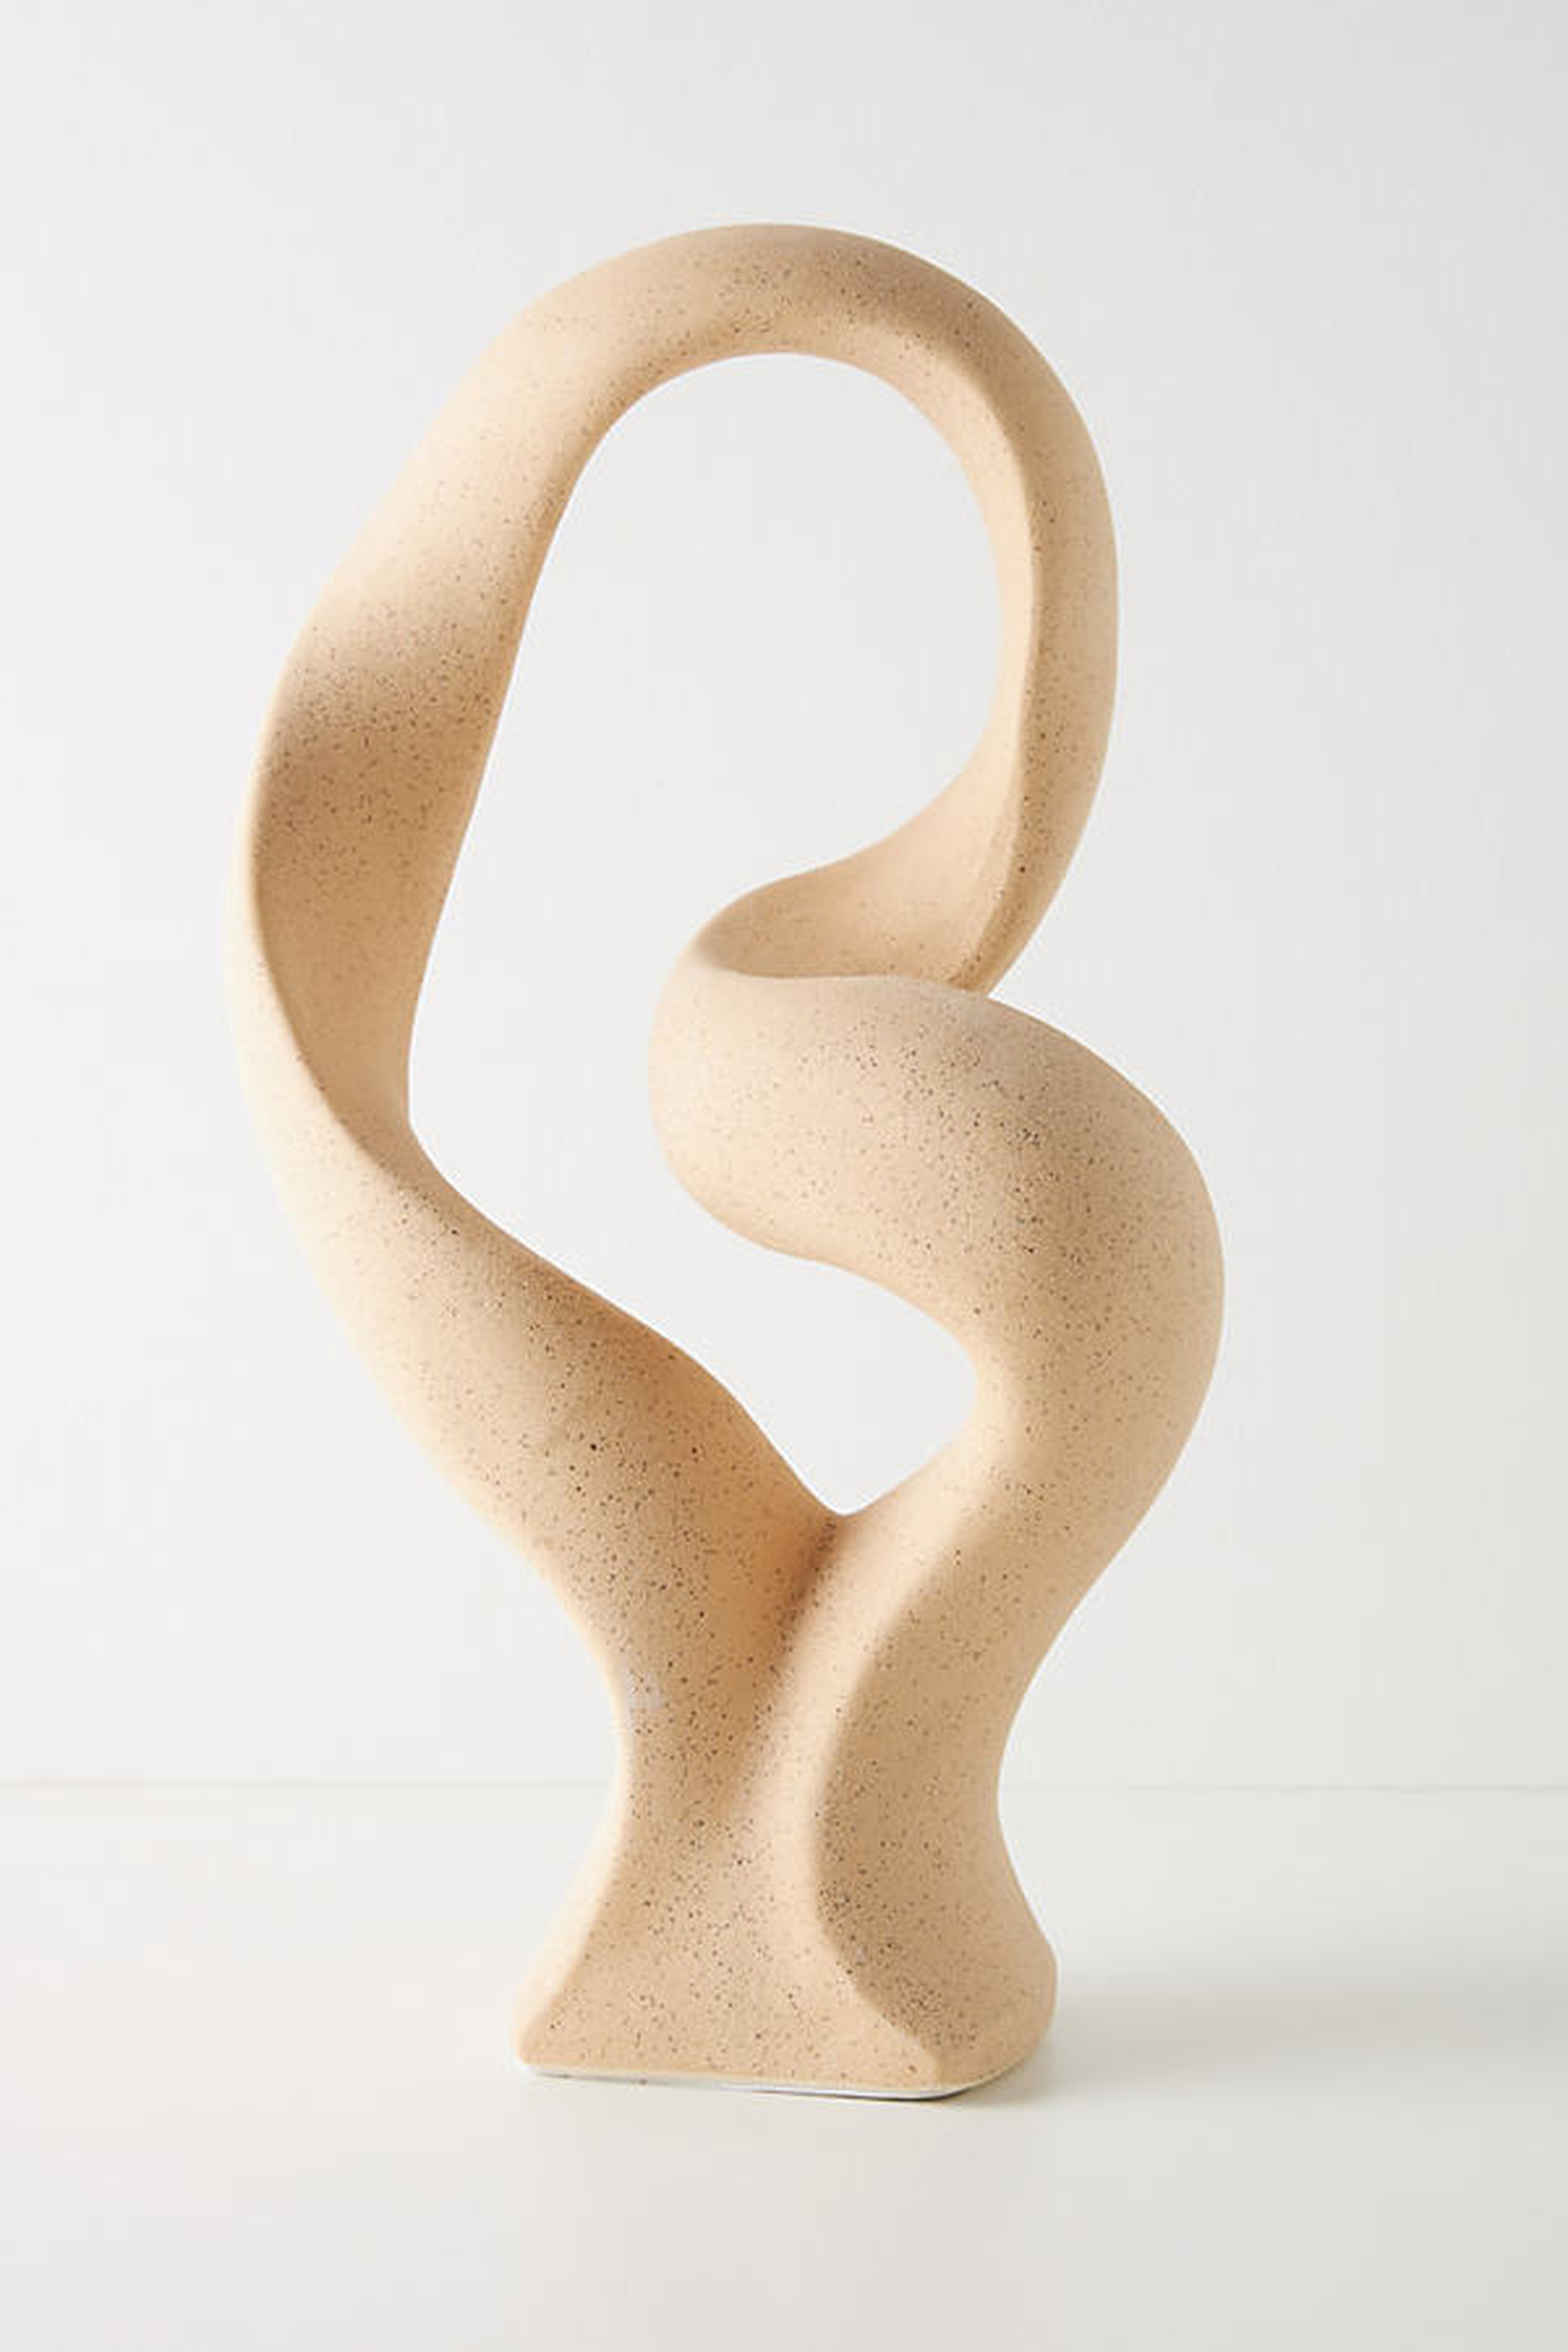 Abstract Twist Decorative Object By Anthropologie in White - Anthropologie